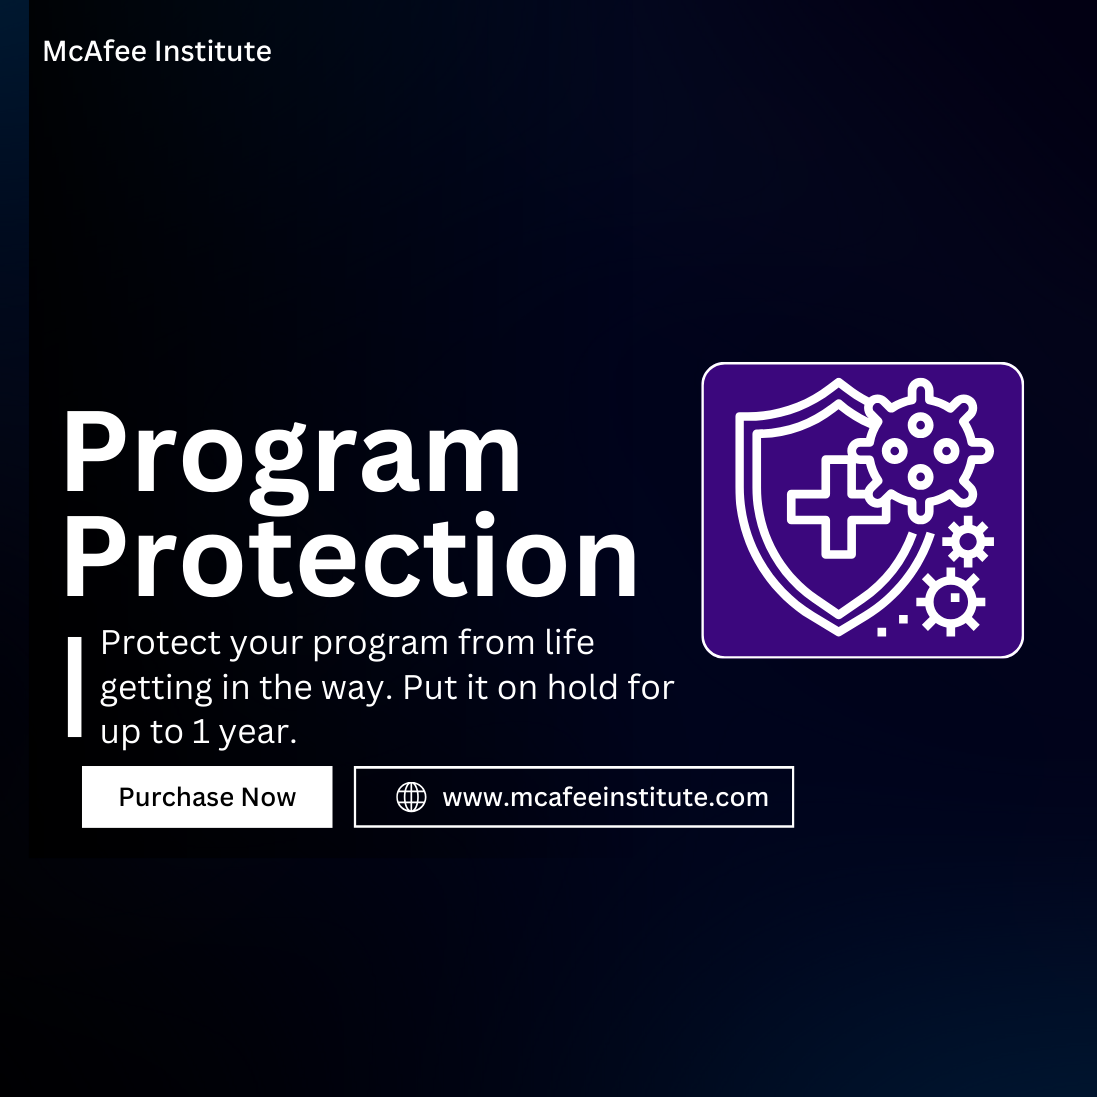 Peace of Mind Program Protection